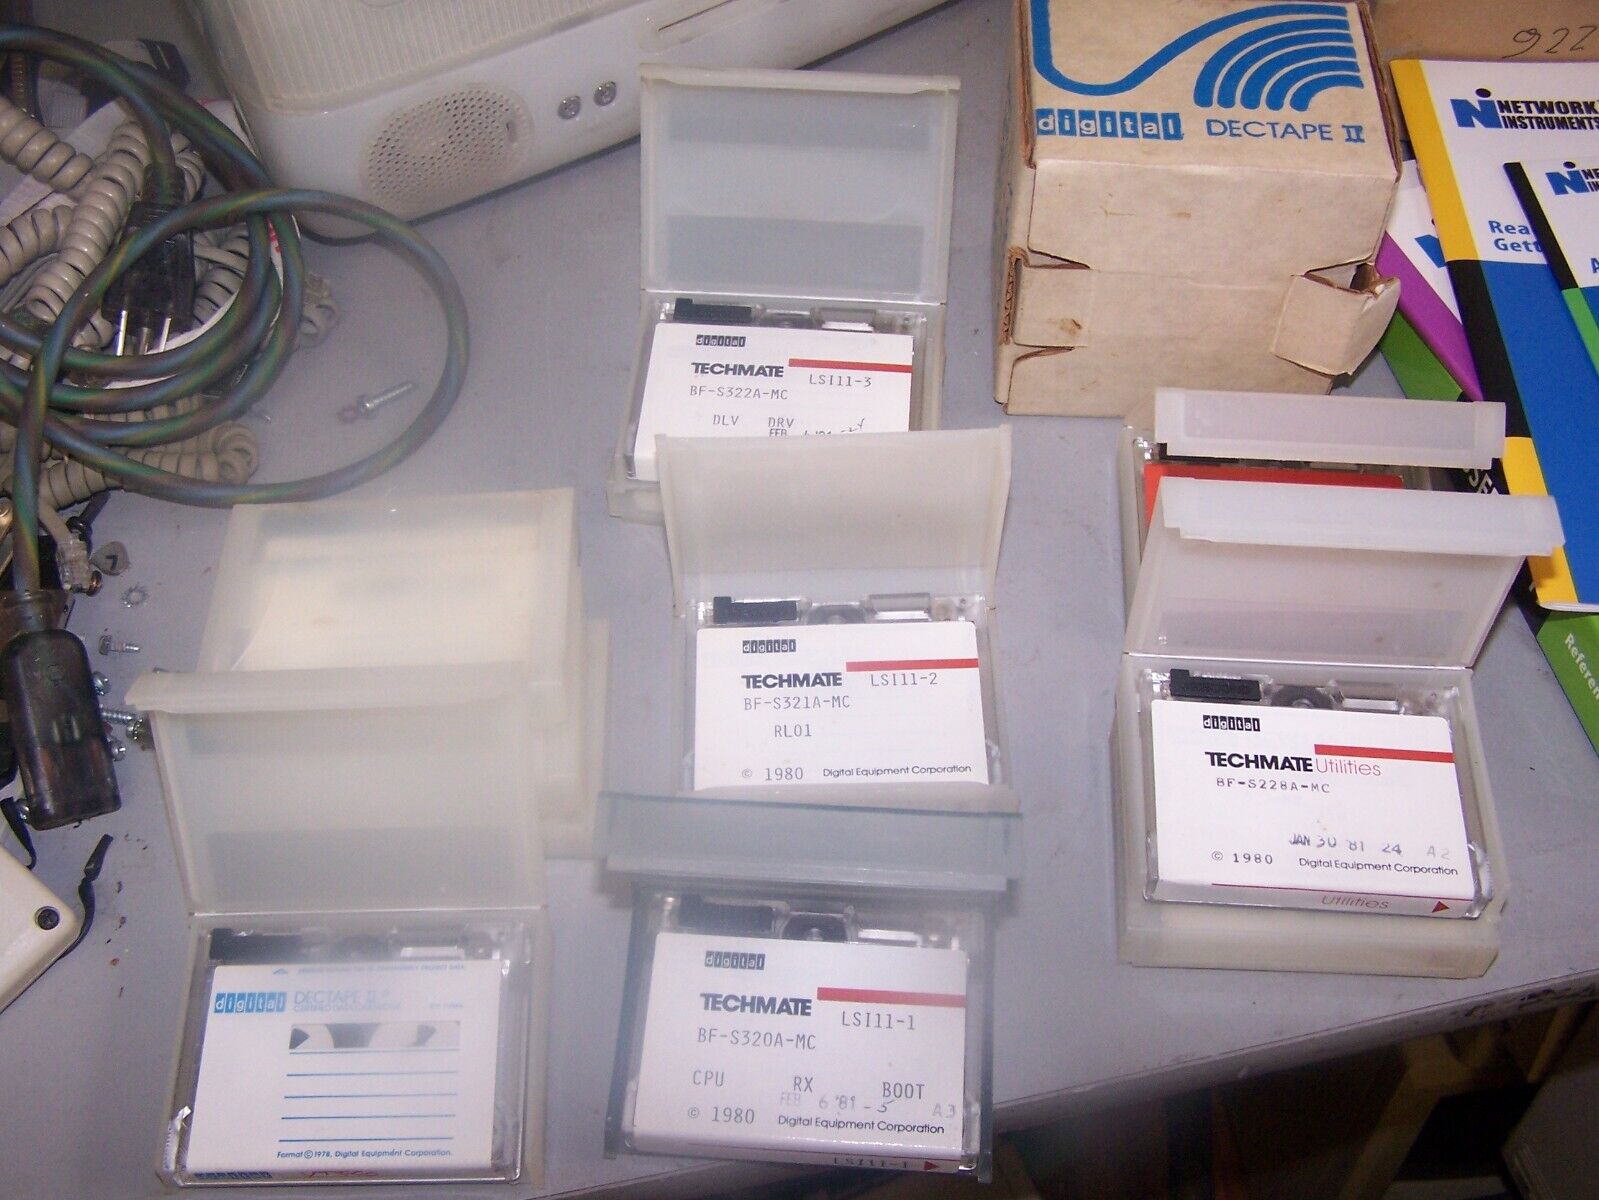 Set of 11 digital equipment tapes - sold as is